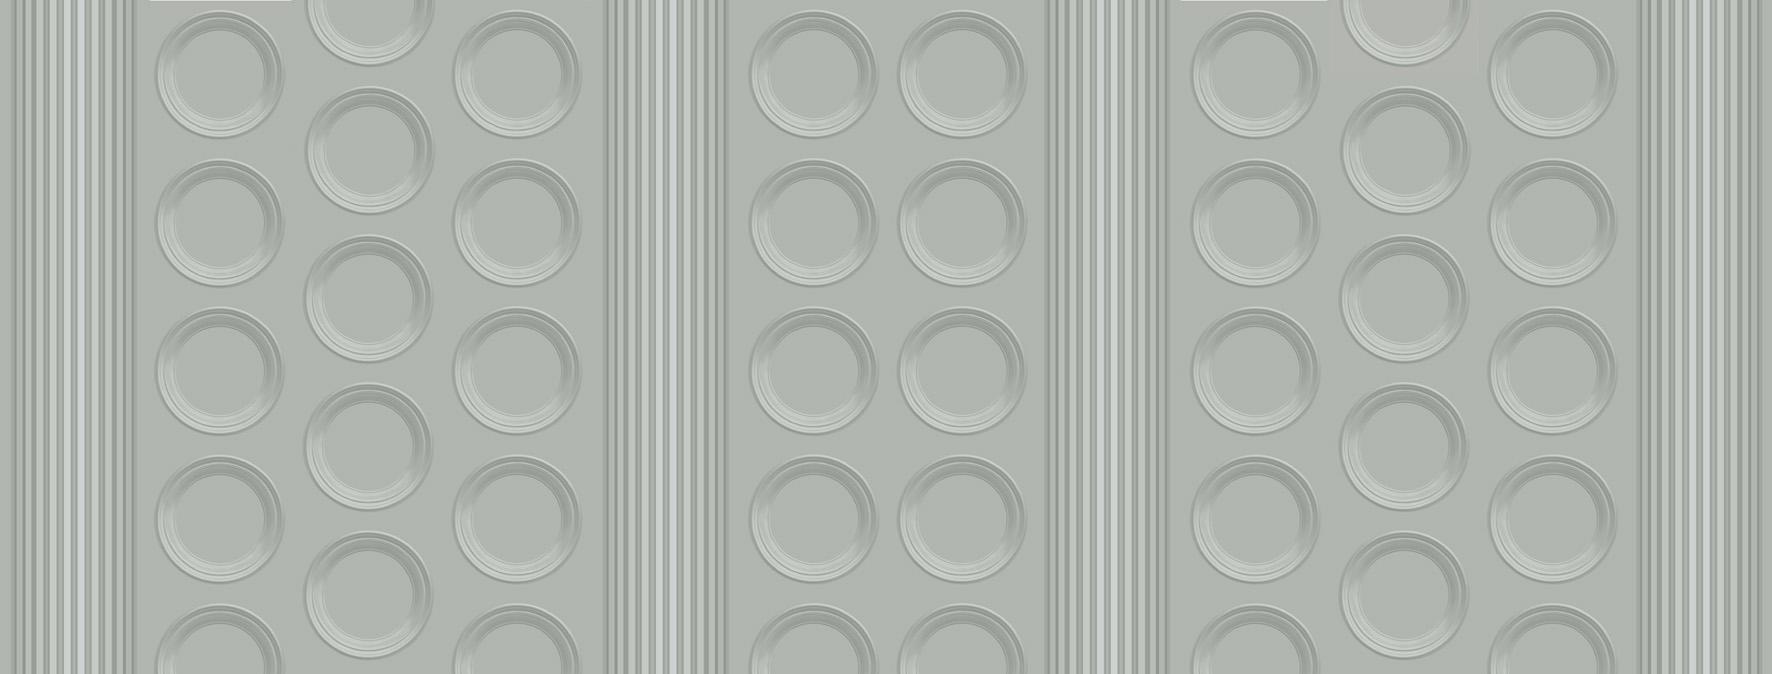 Doctor Who Wallpaper Classic TARDIS Roundels ForbiddenPlanet